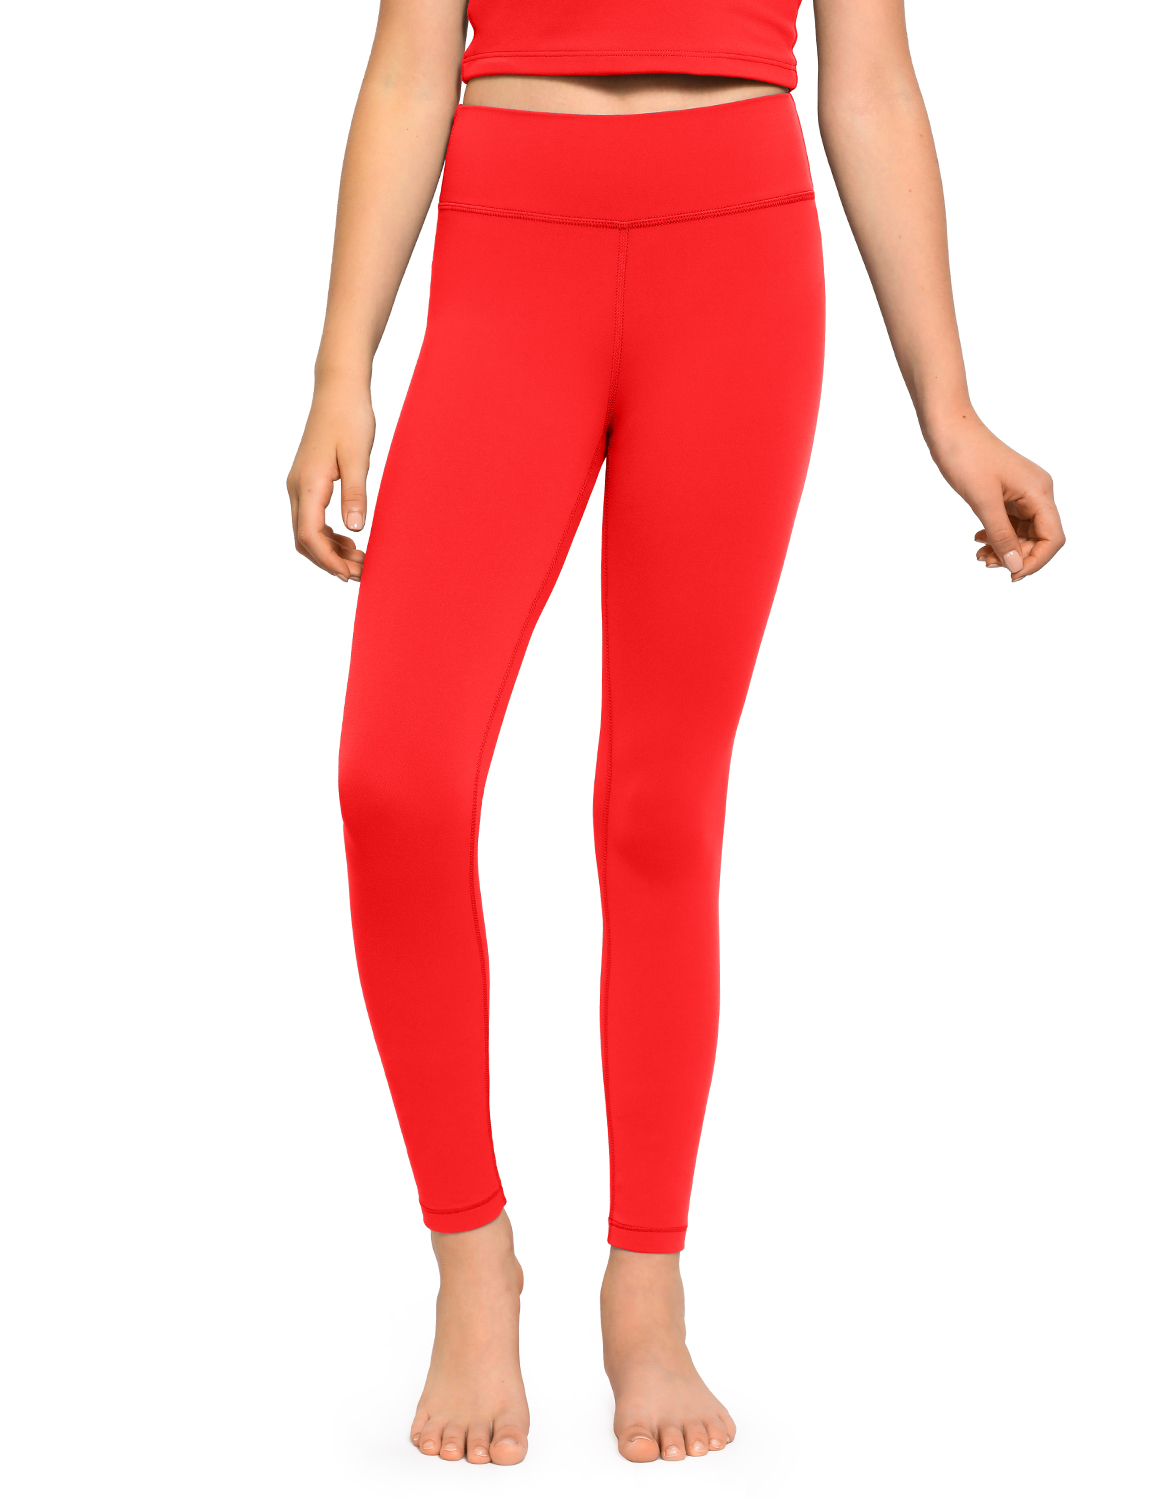 Crz Yoga Yoga Leggings Size XS in Noctilucence Red #26